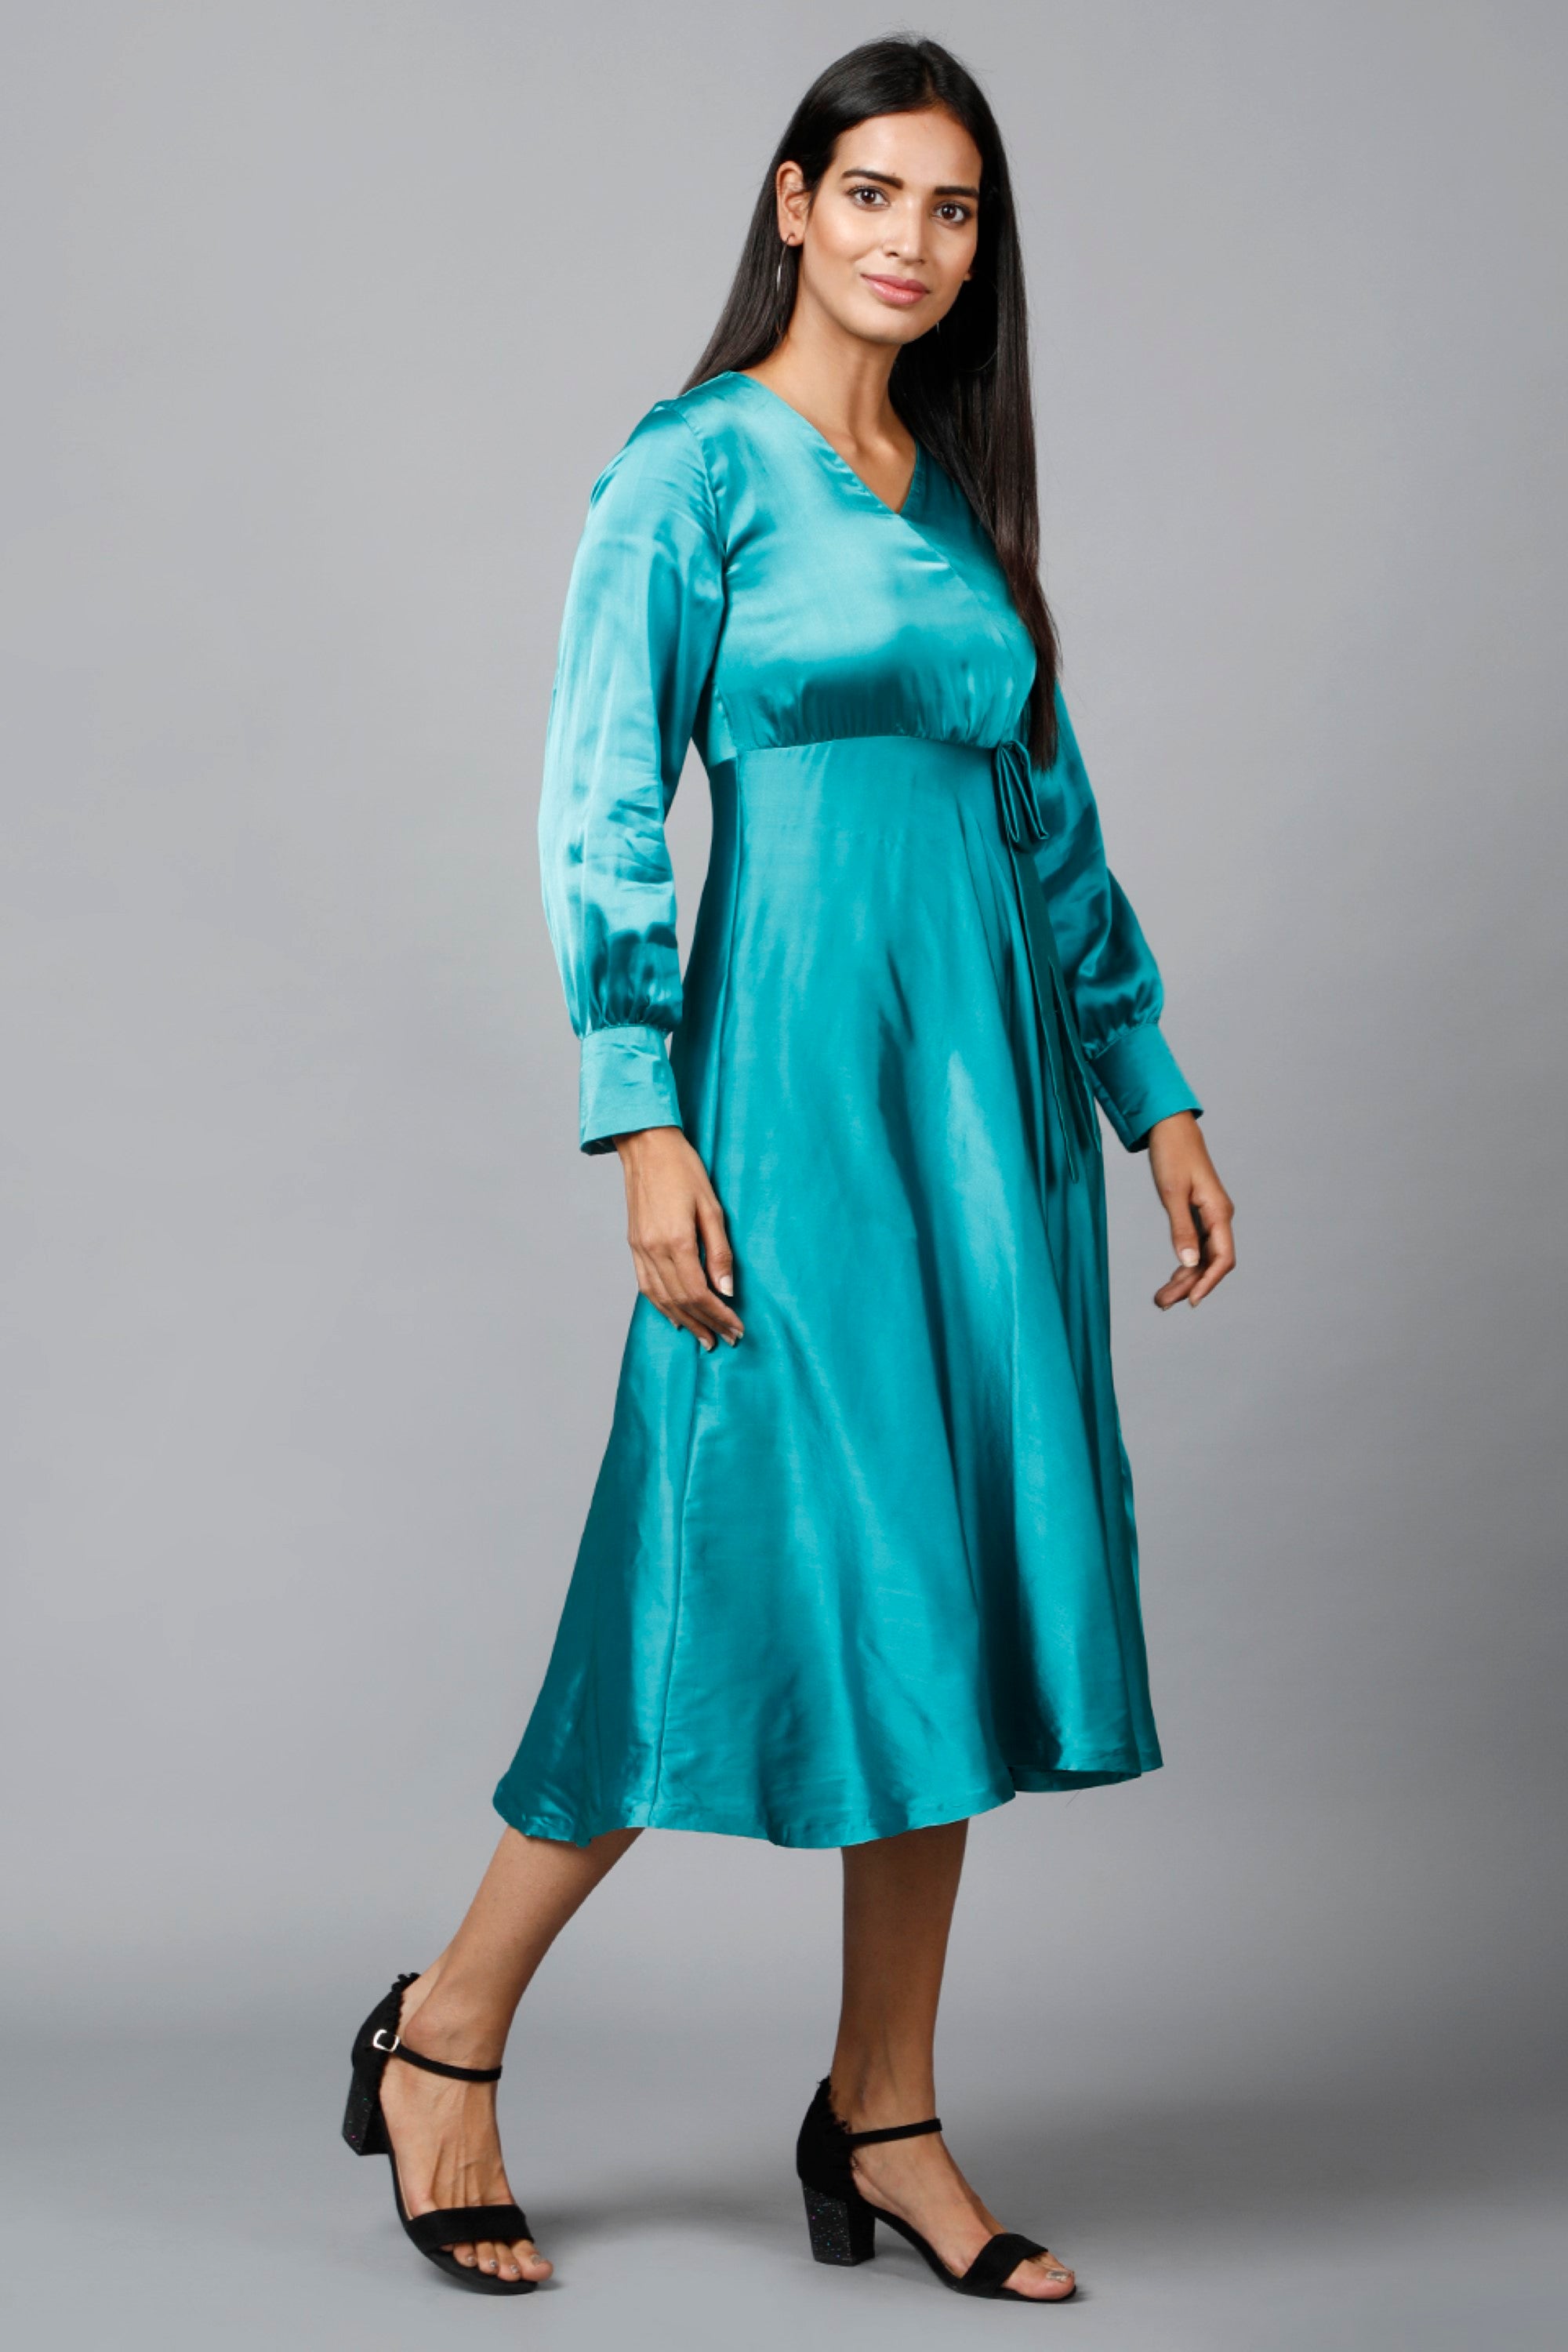 Women's Empire Line With Cuff Satin Wrap Dress Green  - MIRACOLOS by Ruchi